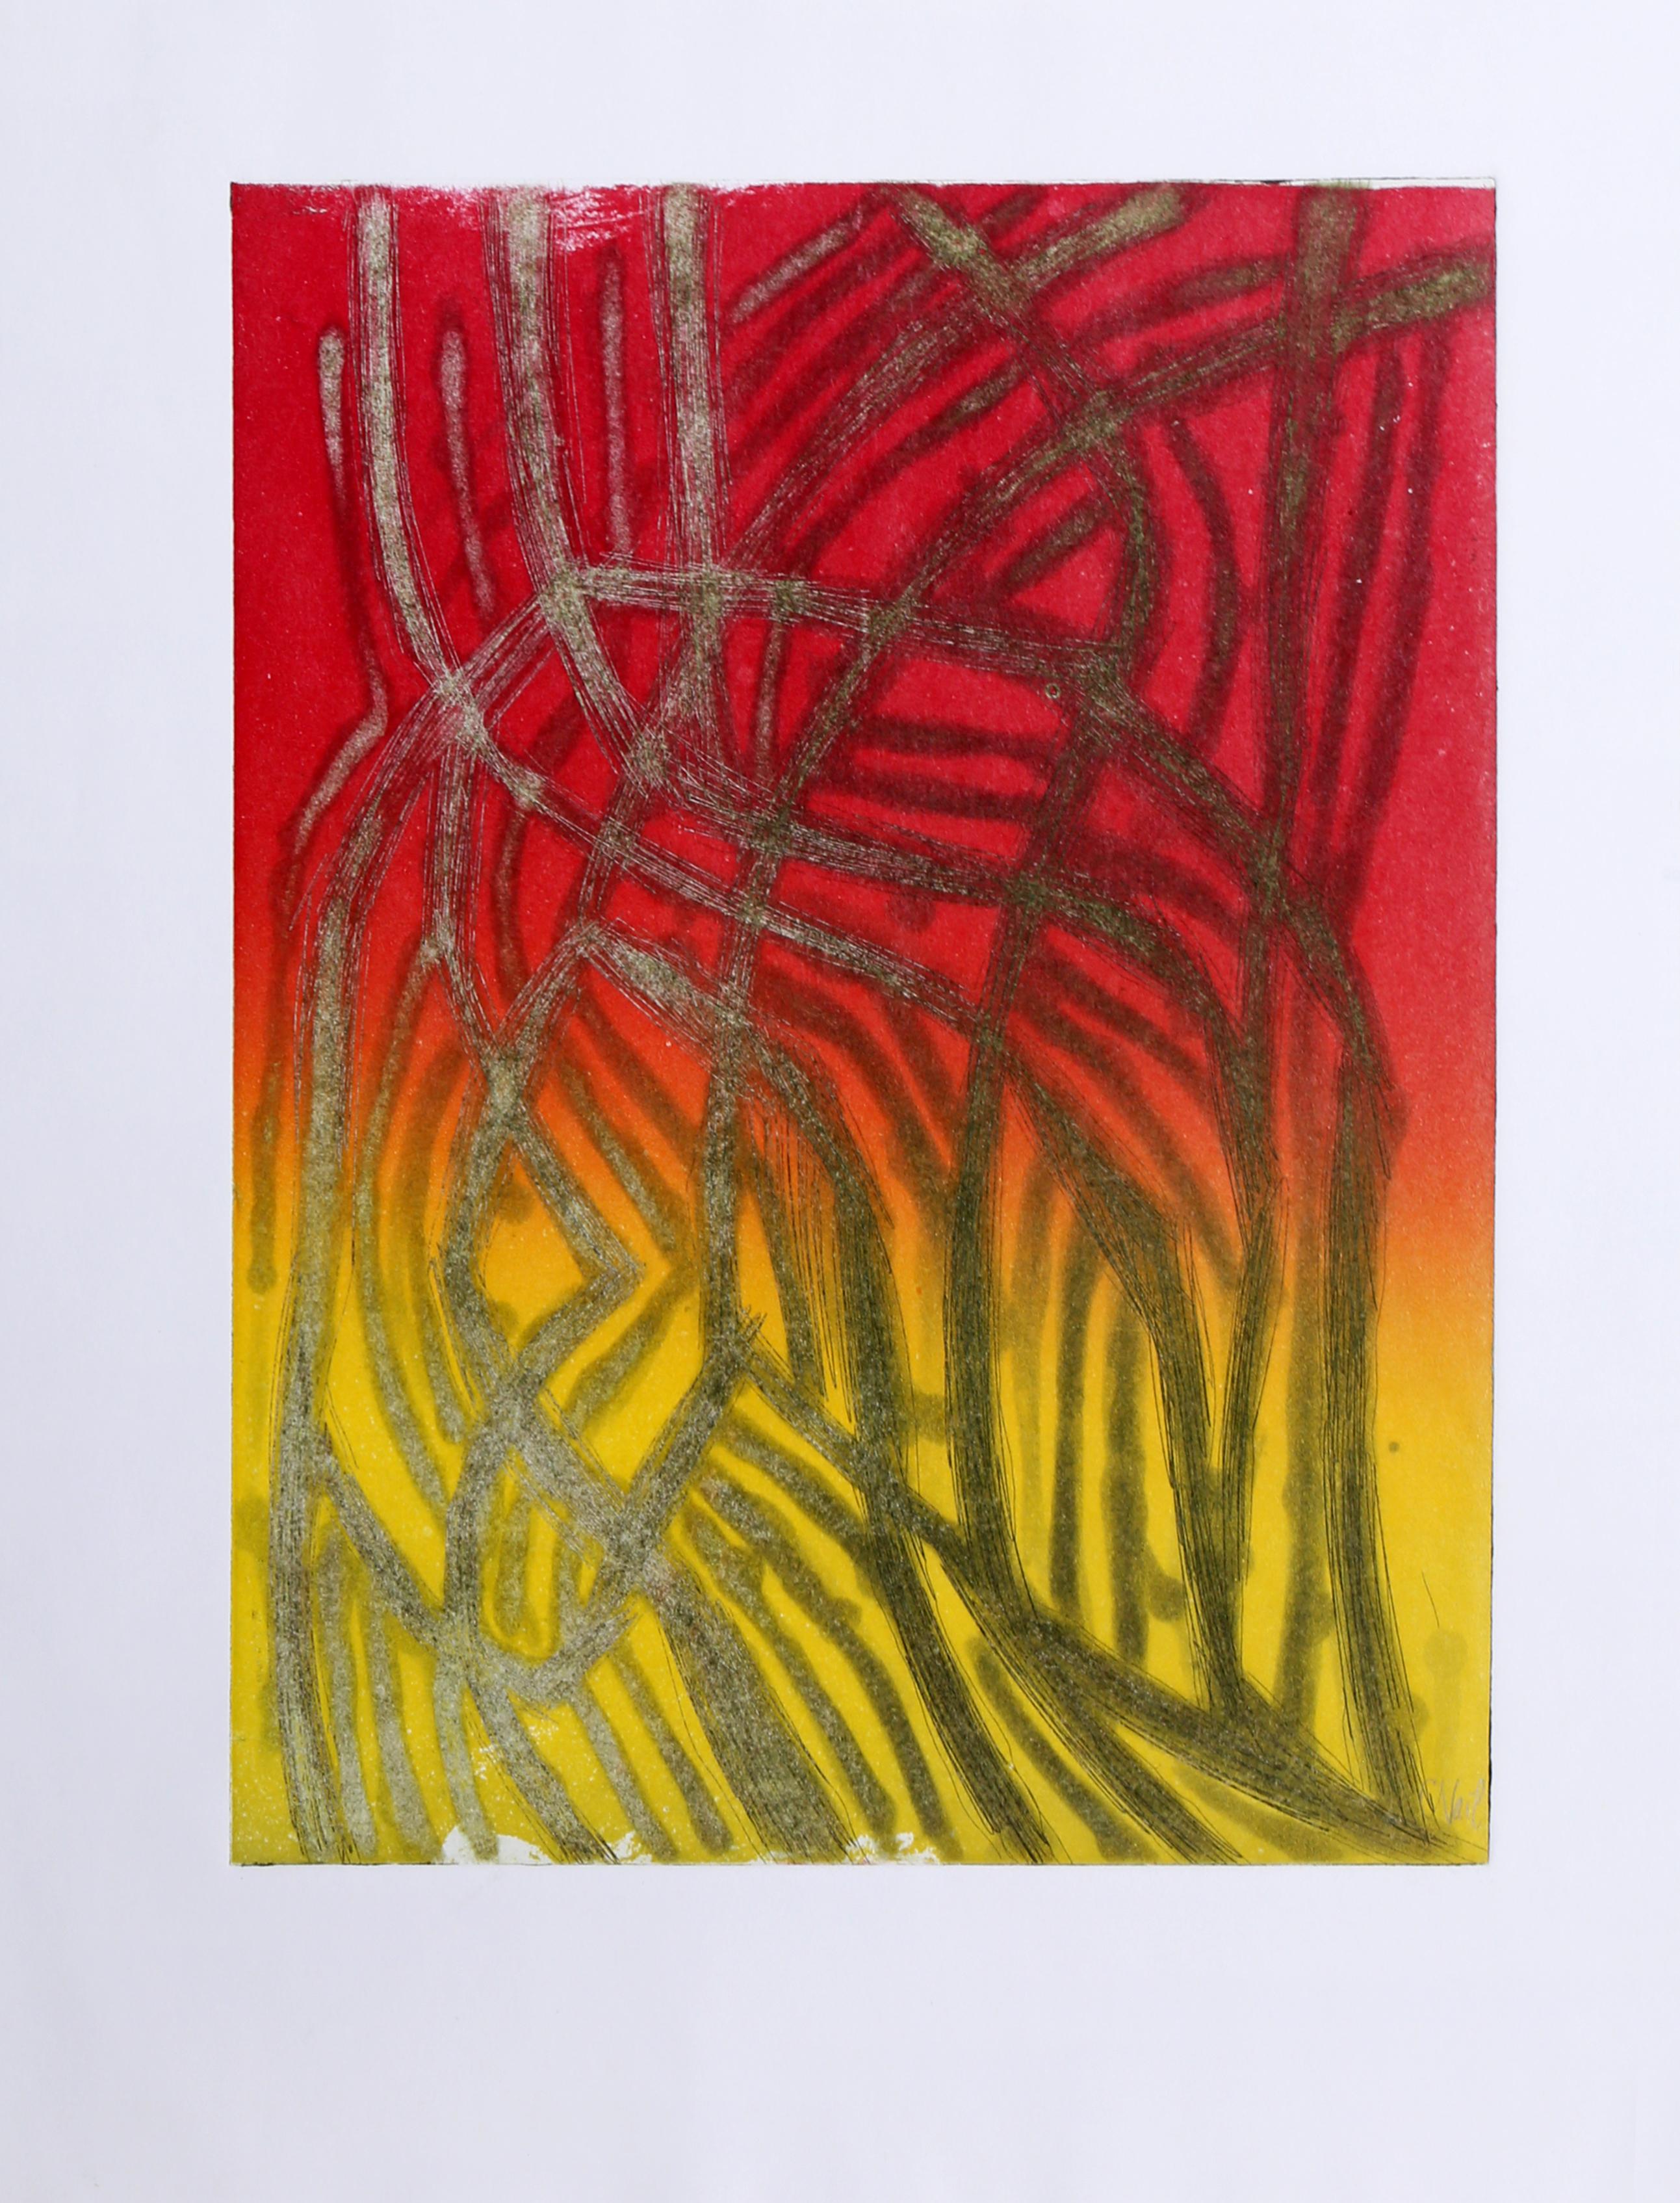 Abstract 2
Date: 2005
Monoprint, signed in pencil
Image Size: 13 x 9.75 inches
Size: 17 x 13 in. (43.18 x 33.02 cm)